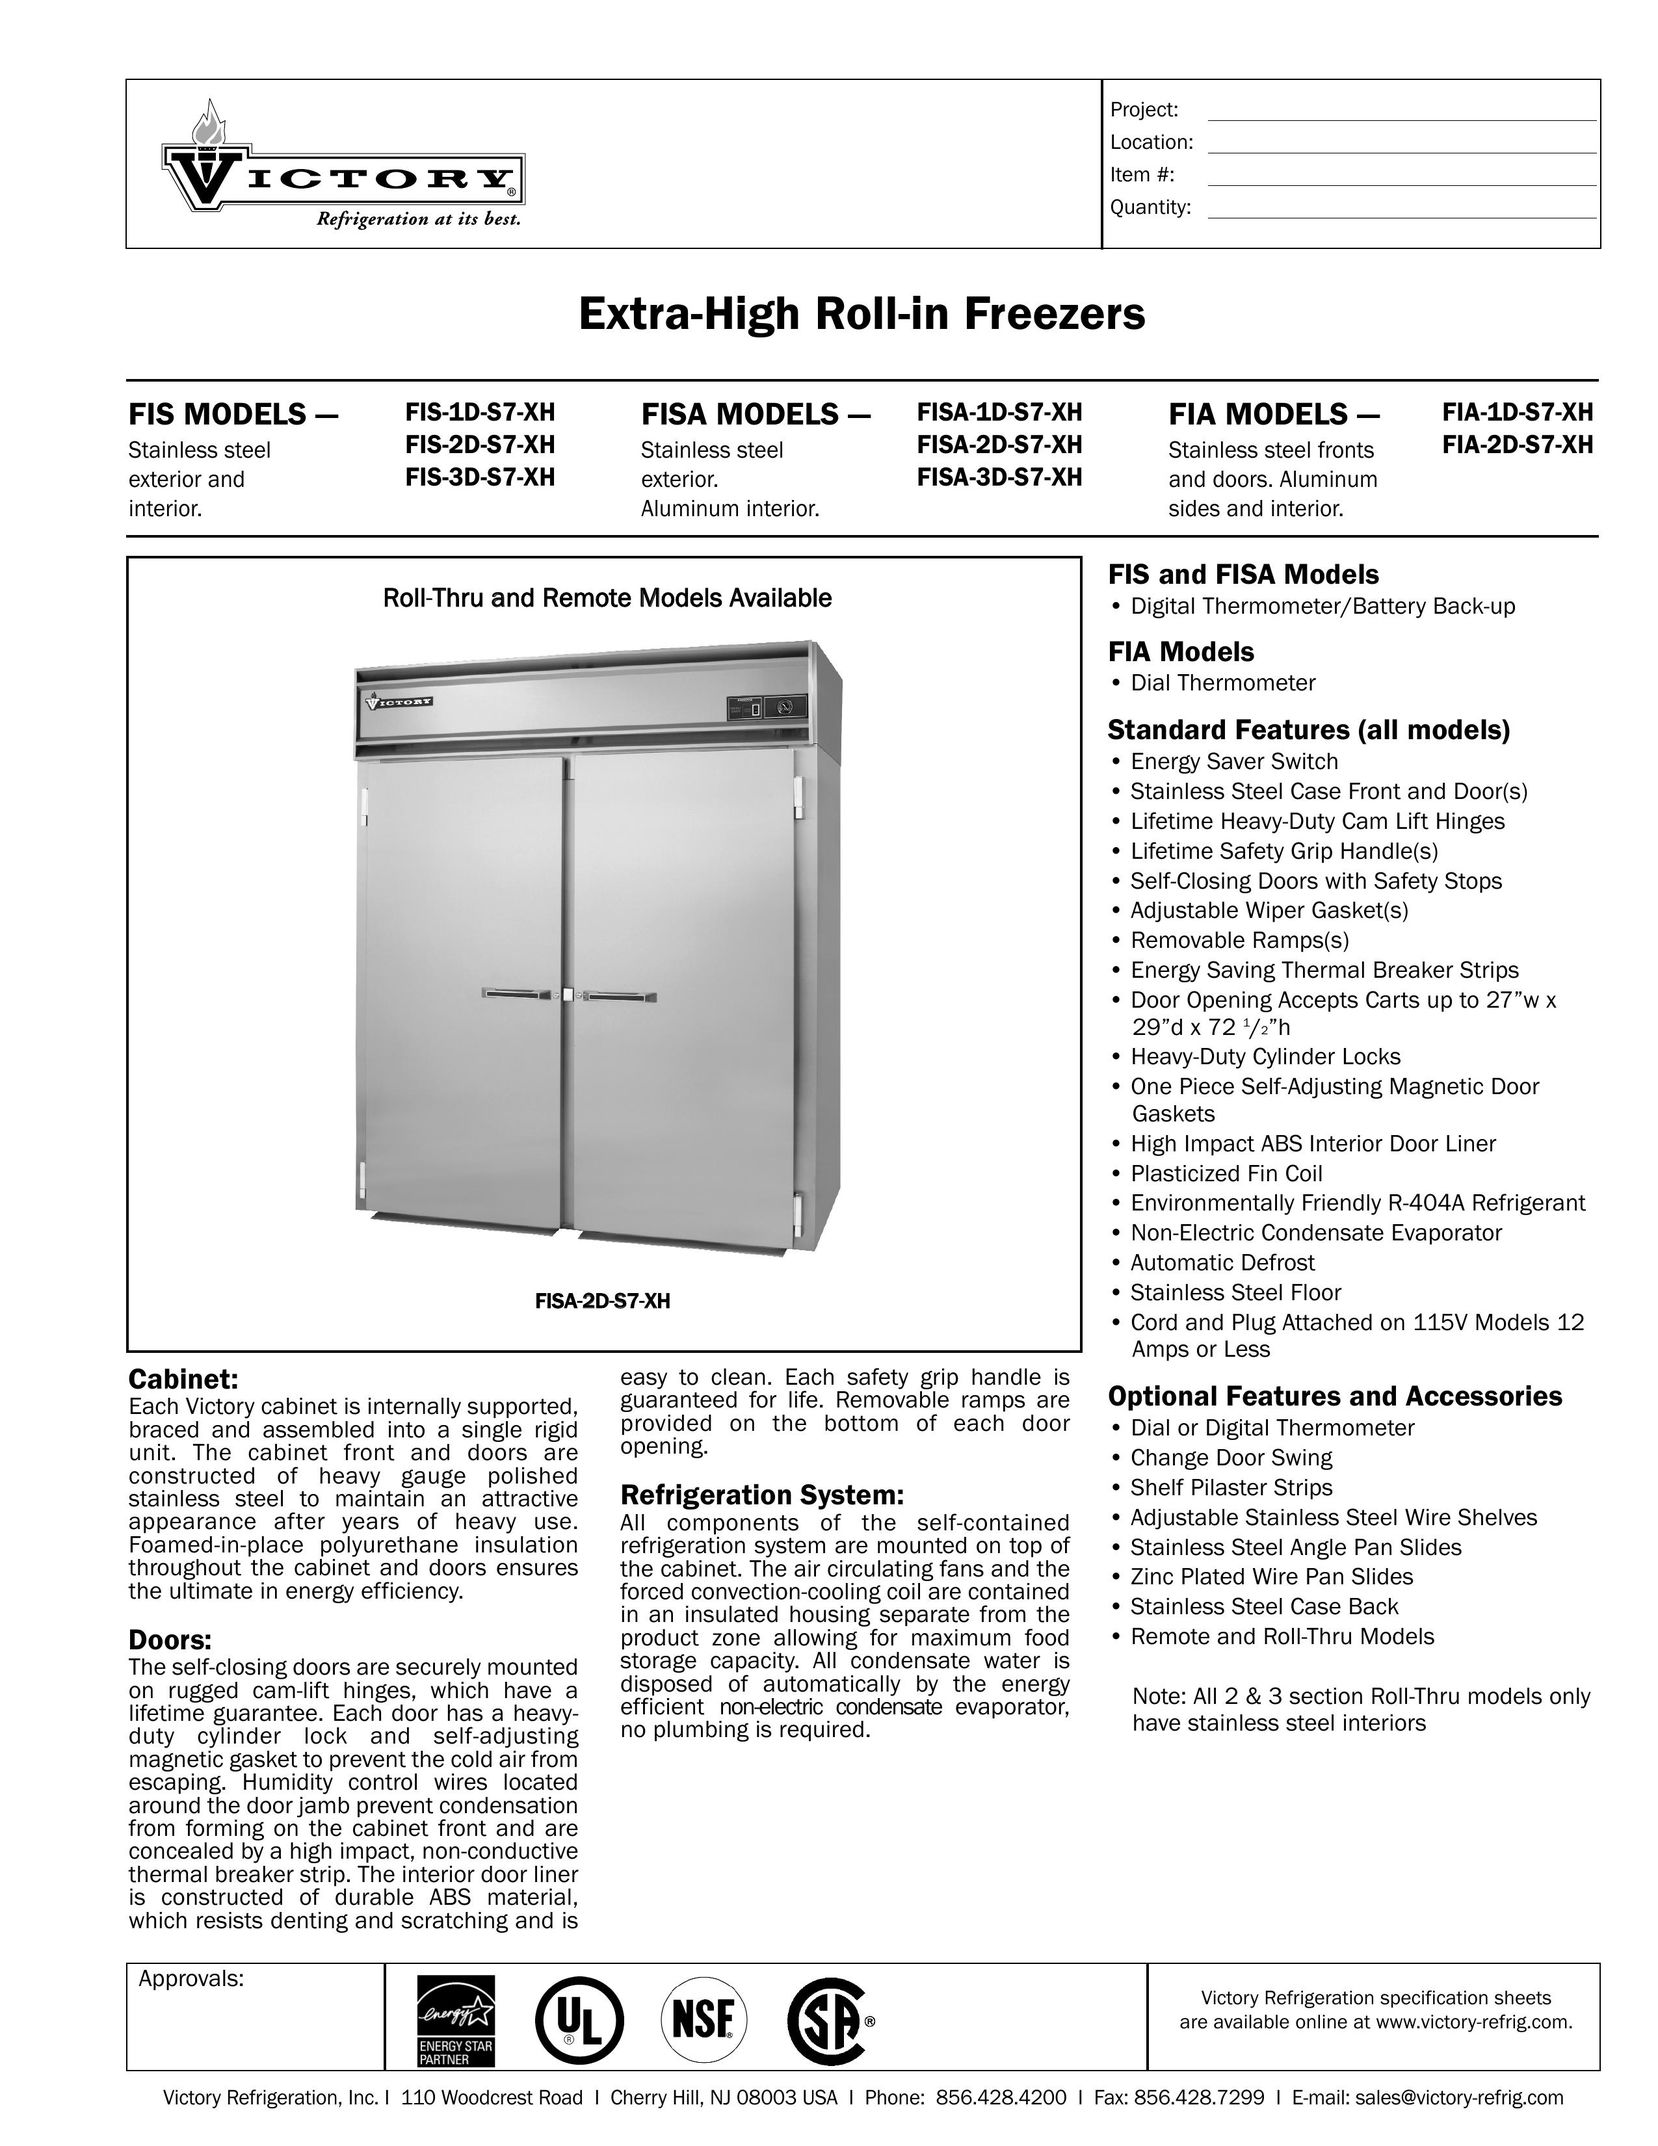 Victory Refrigeration FIS-2D-S7-XH Freezer User Manual